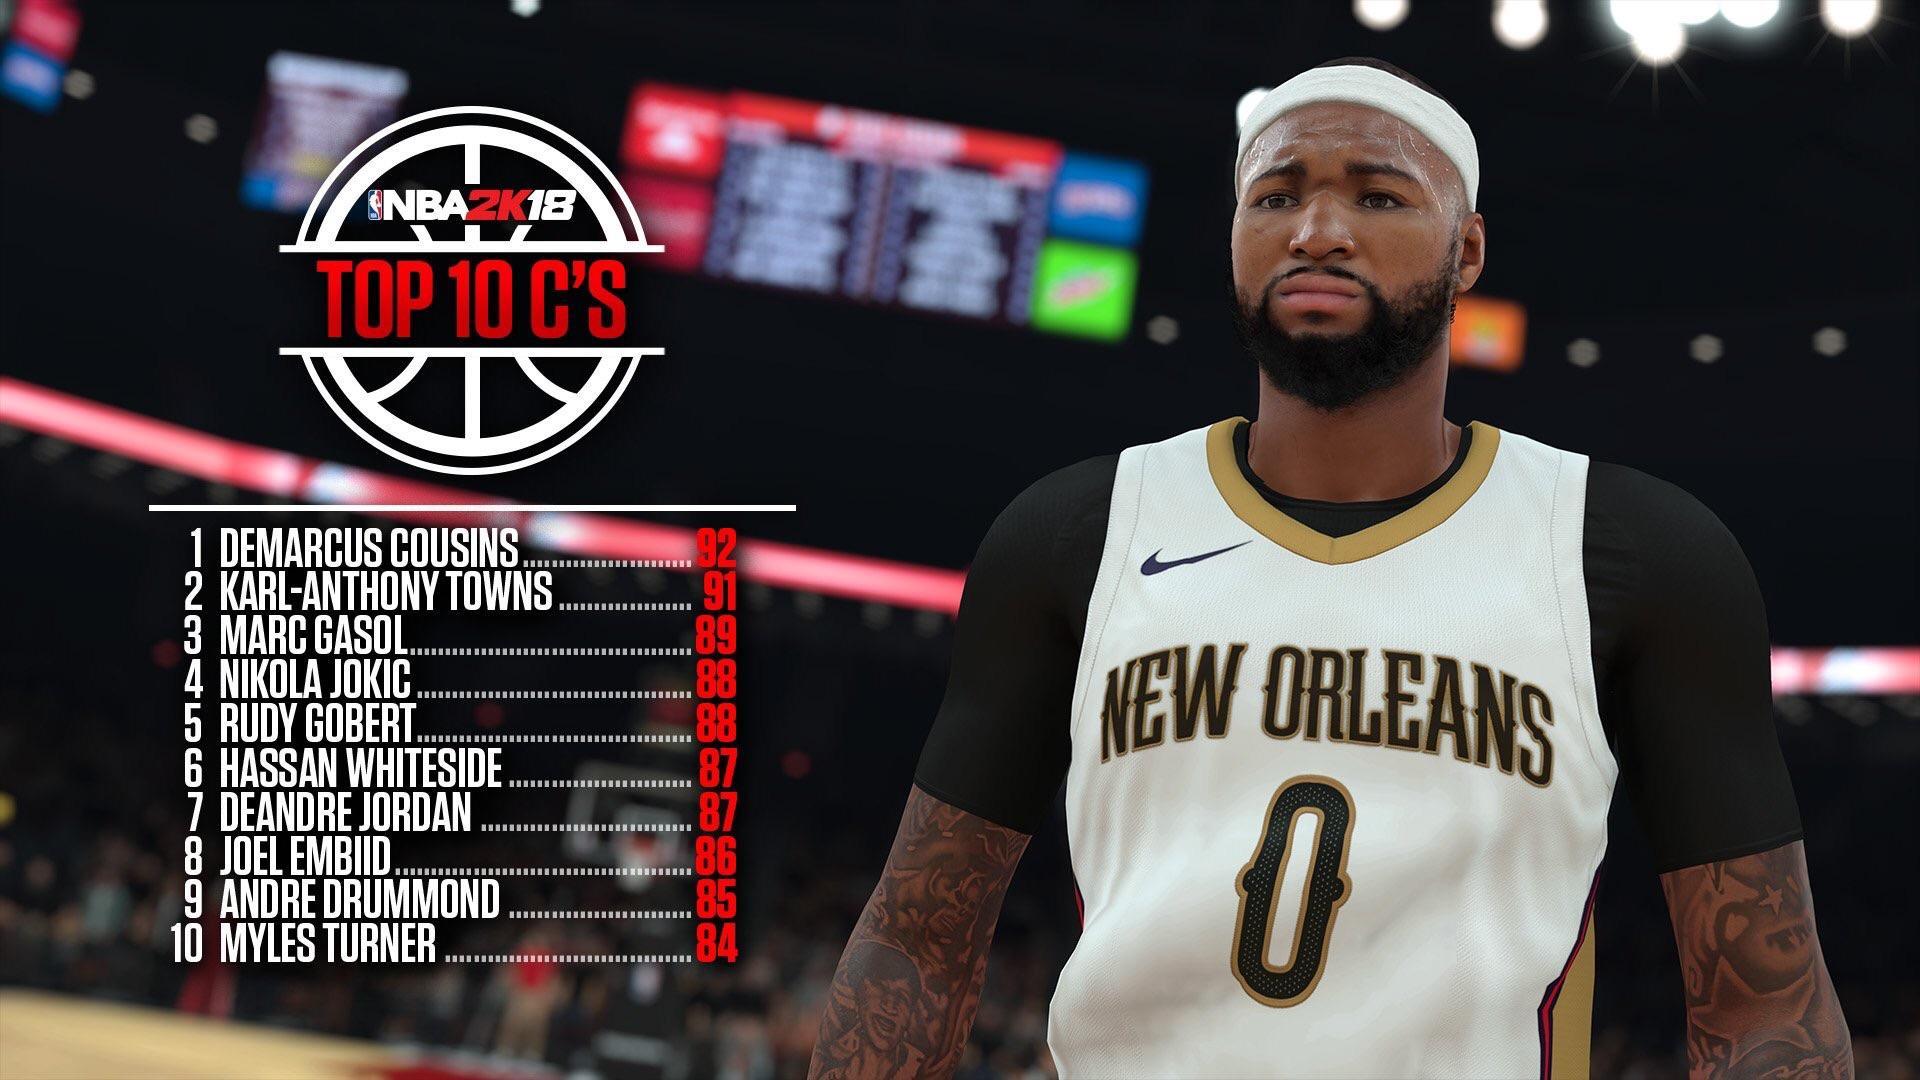 The centers in NBA 2K18